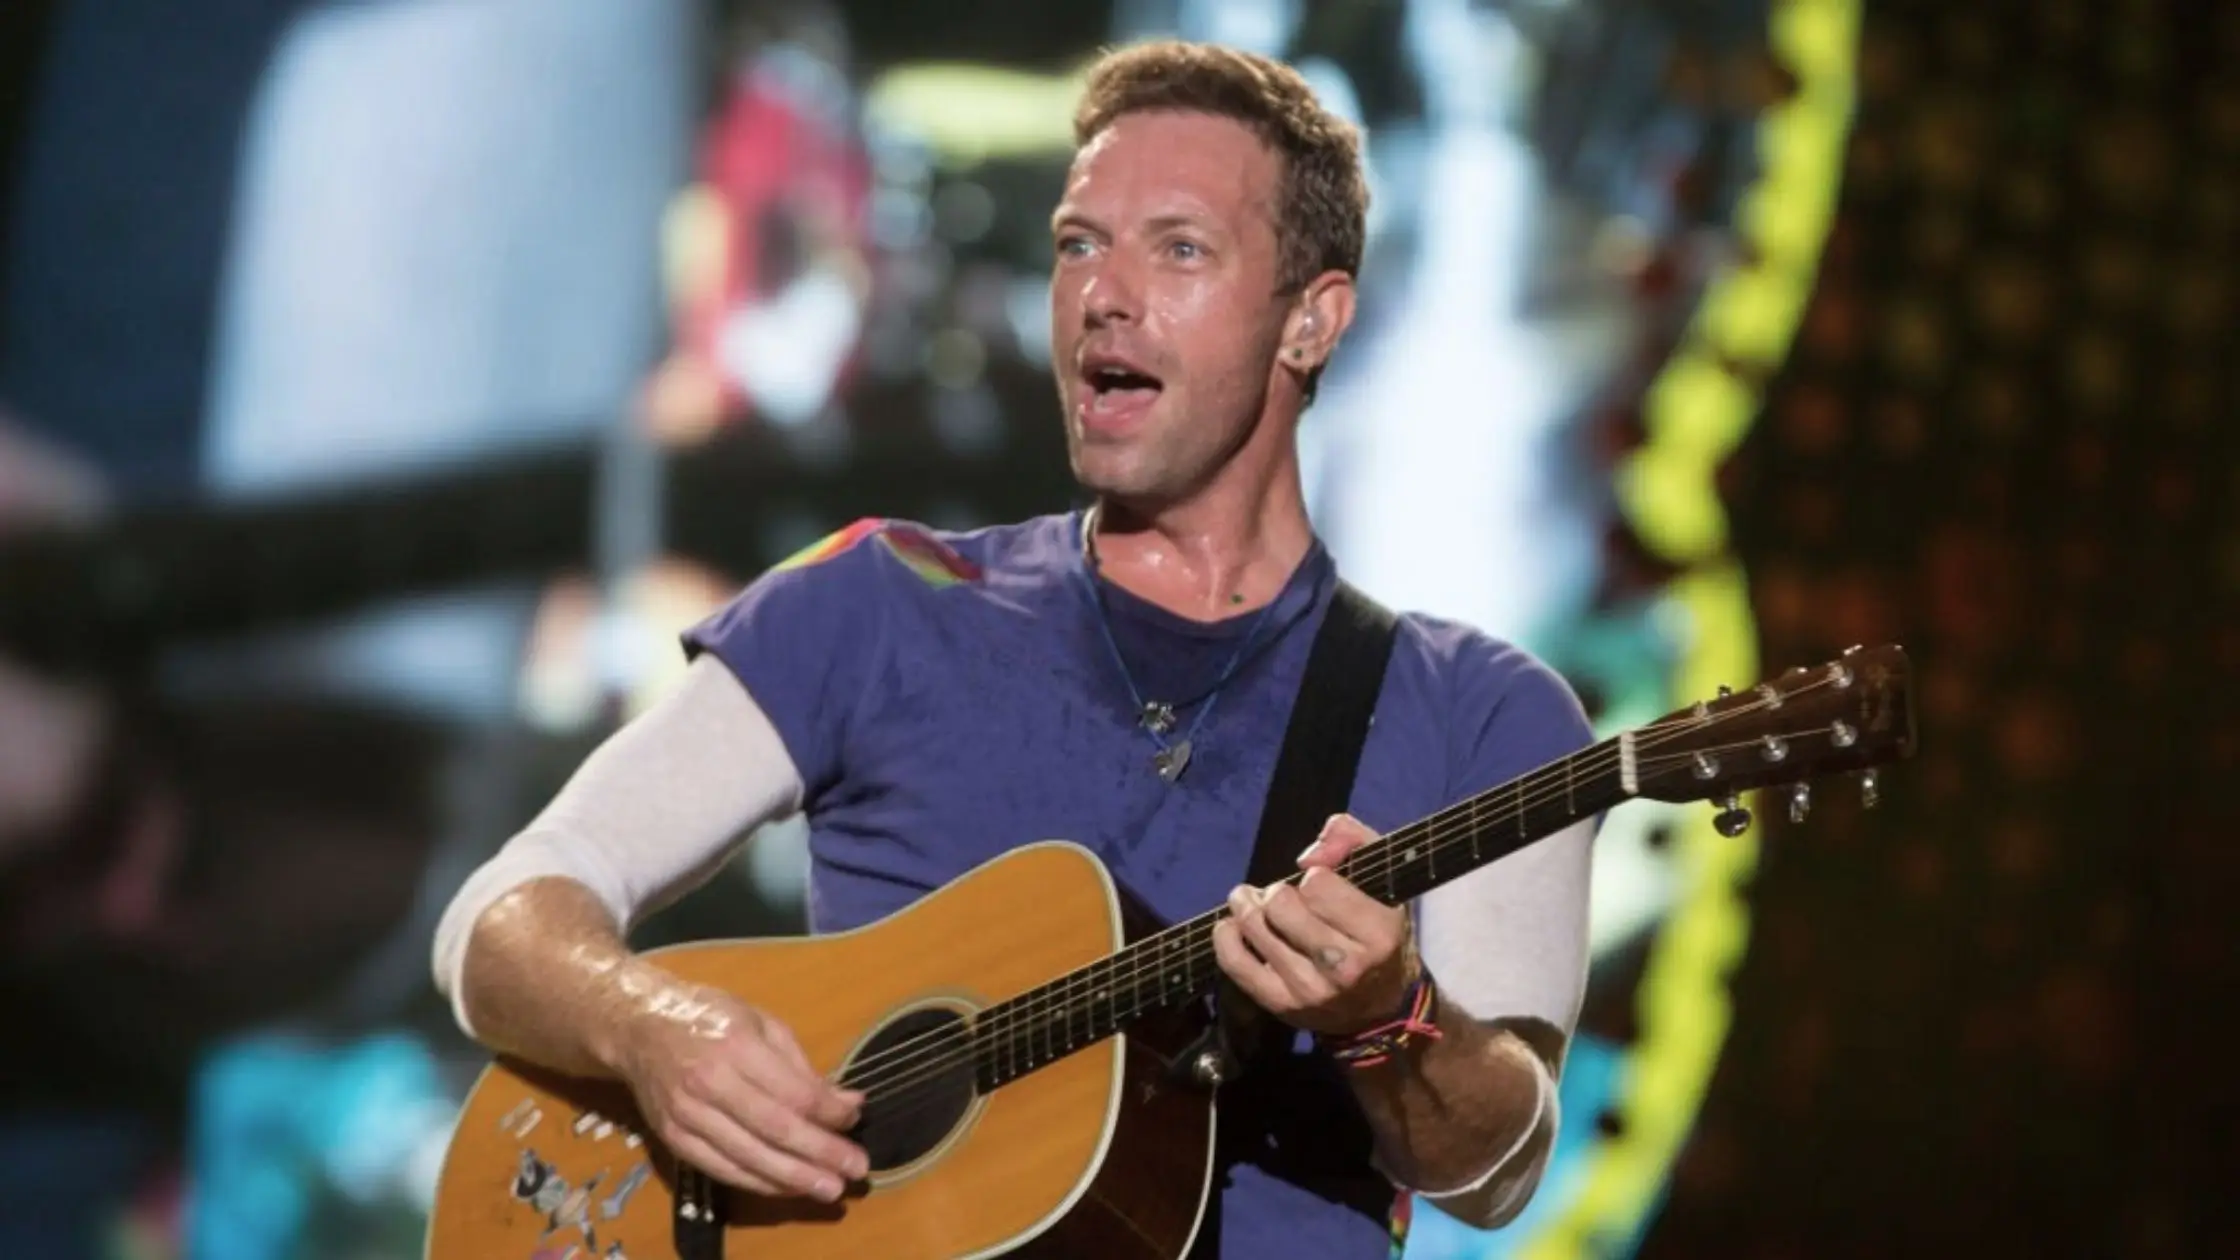 Chris martin One-Meal-A-Day diet